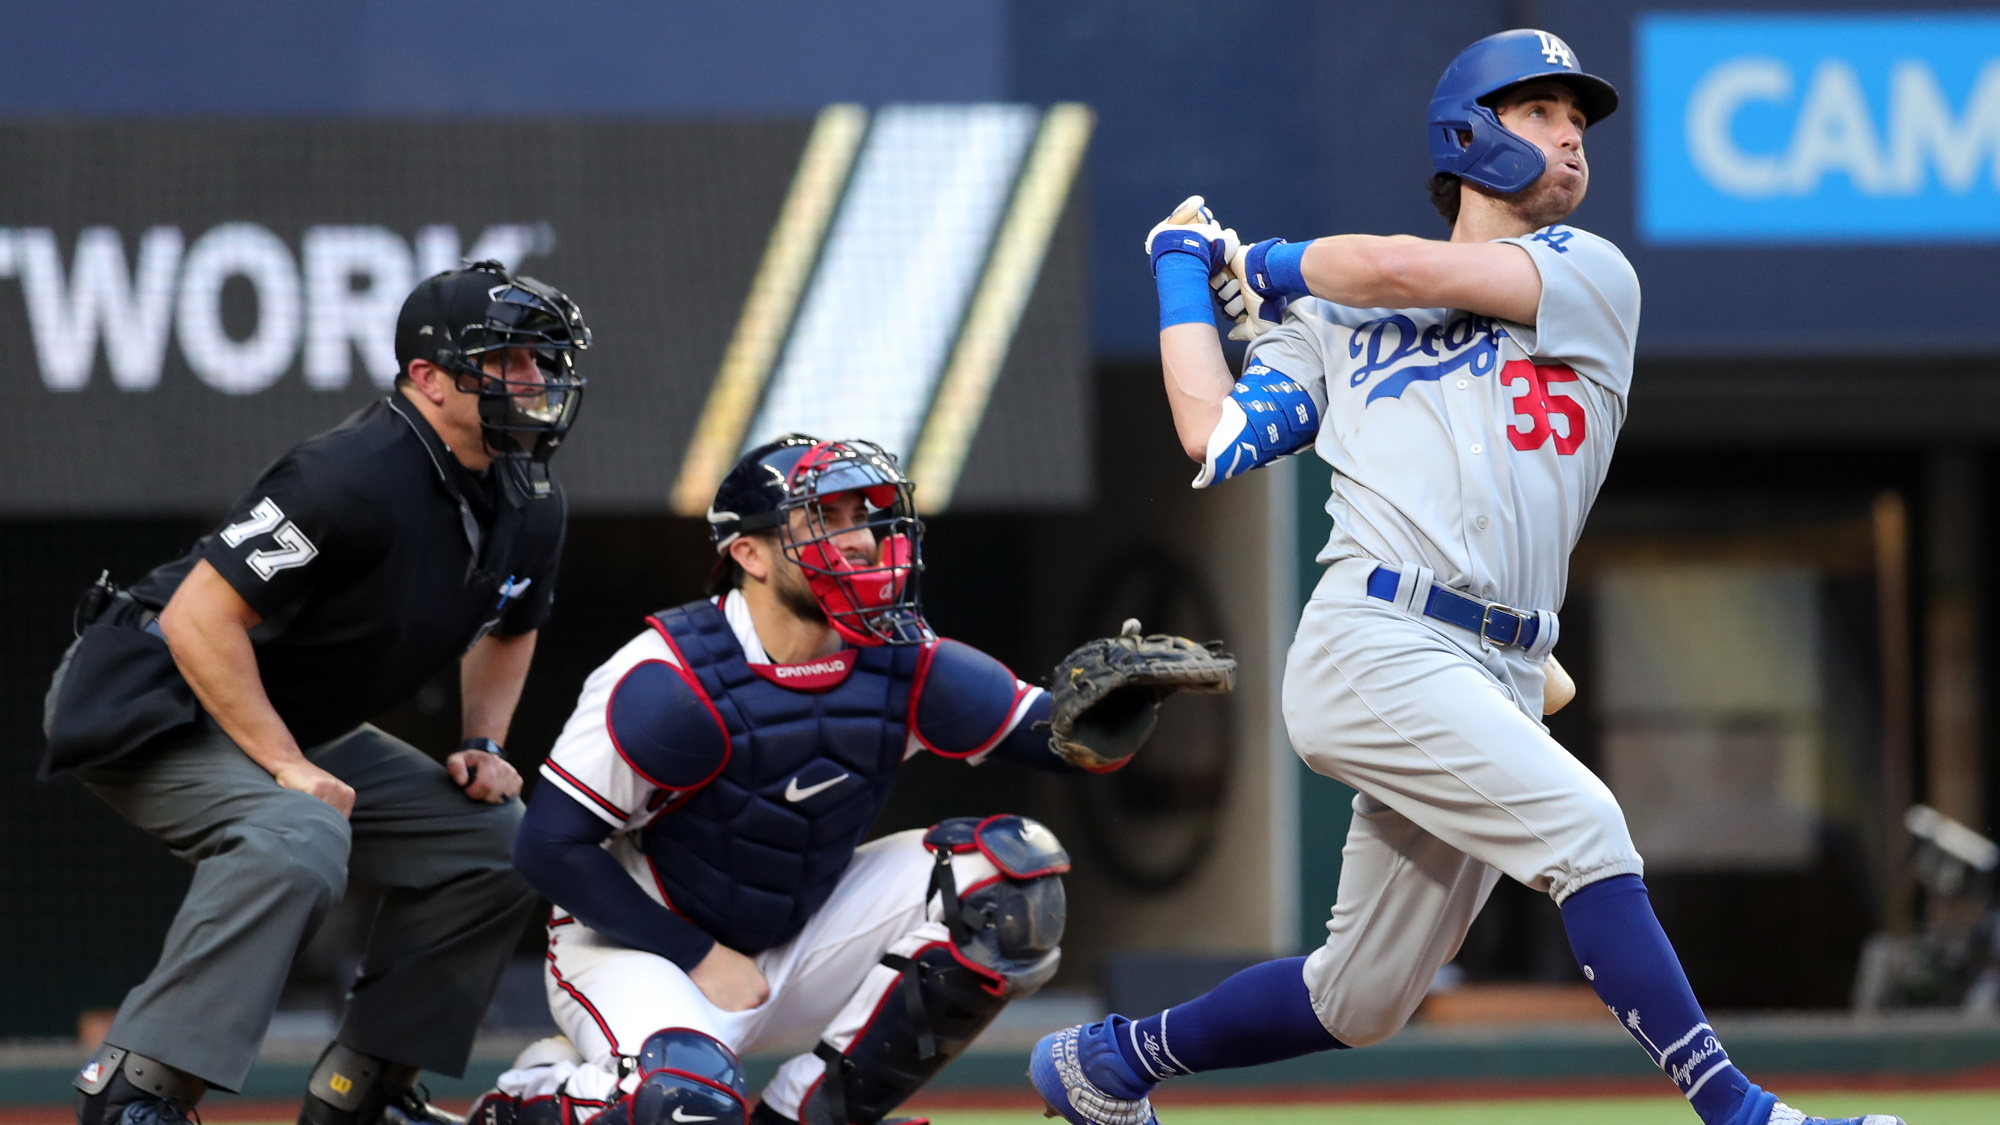 Braves vs Dodgers live stream how to watch NLCS playoffs game 5 online